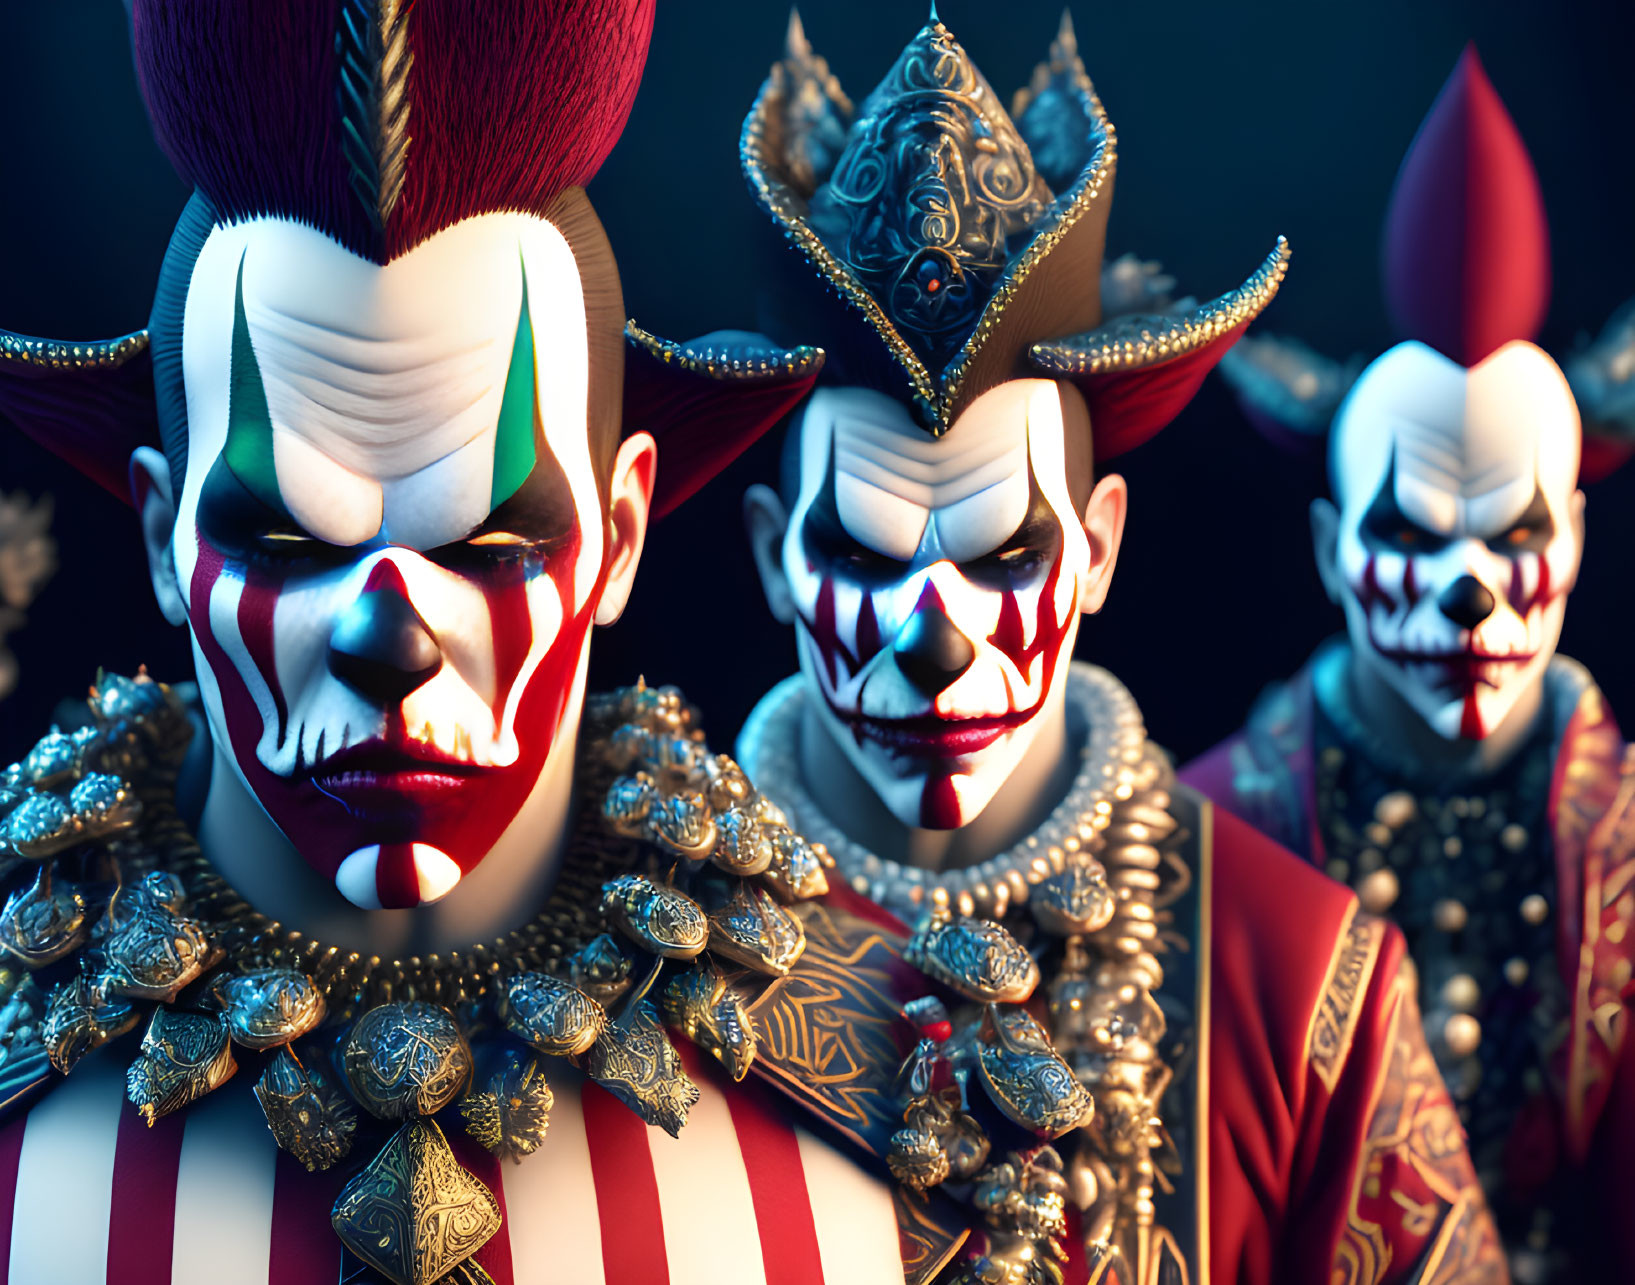 Three sinister clowns with elaborate costumes and menacing gaze on dark background.